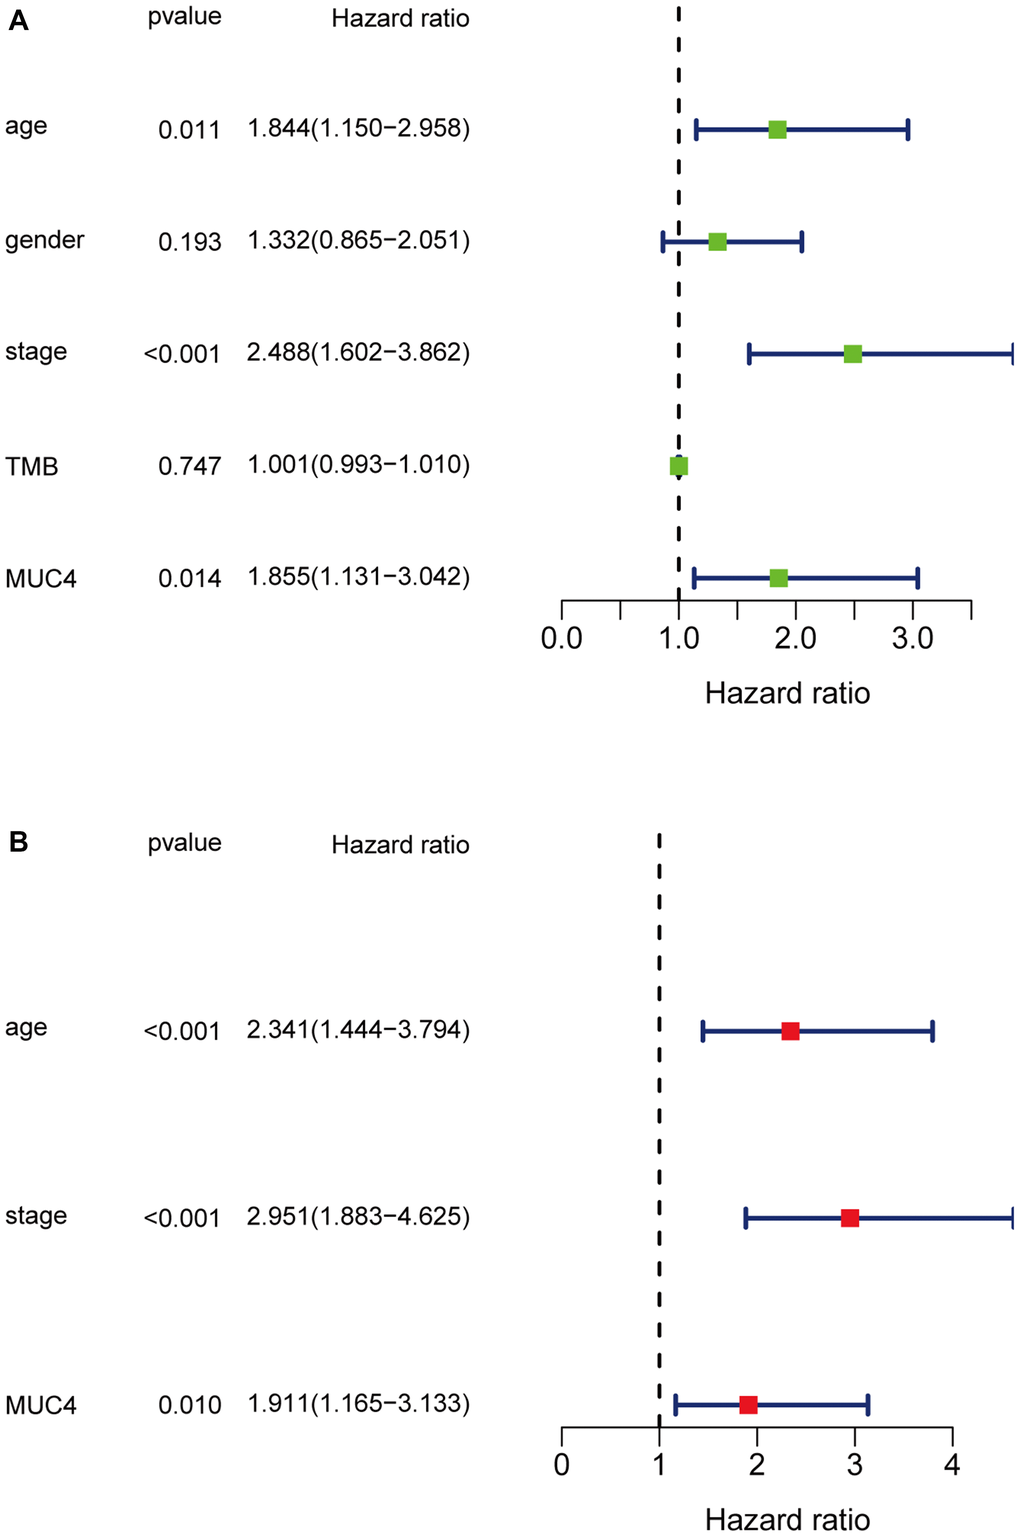 Univariate (A) and multivariate (B) overall survival analysis of colon cancer patients by the Cox proportional hazards model.